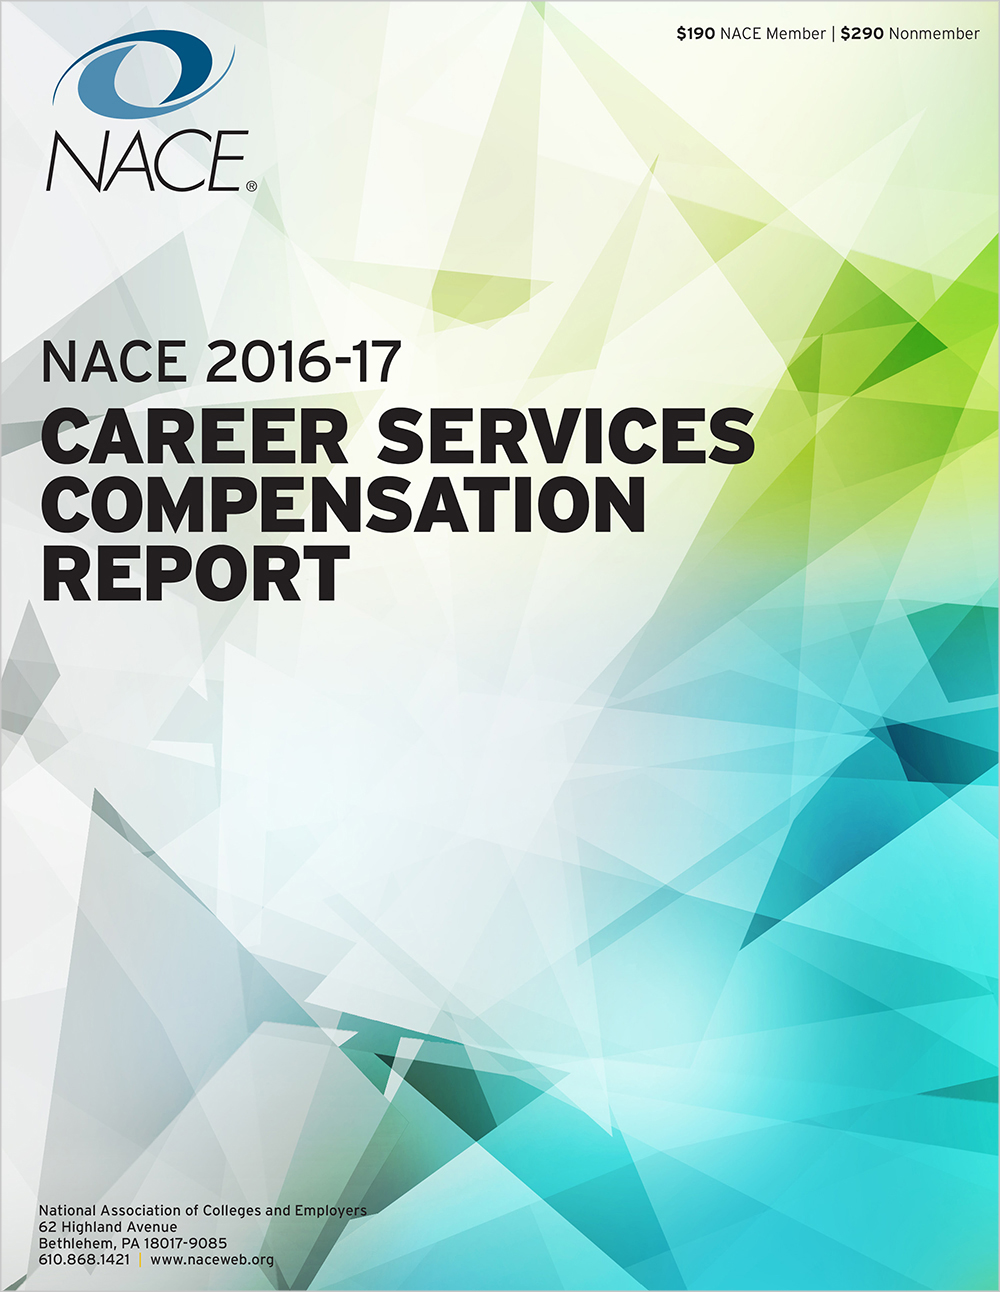 Career Services Compensation Report 2016-17